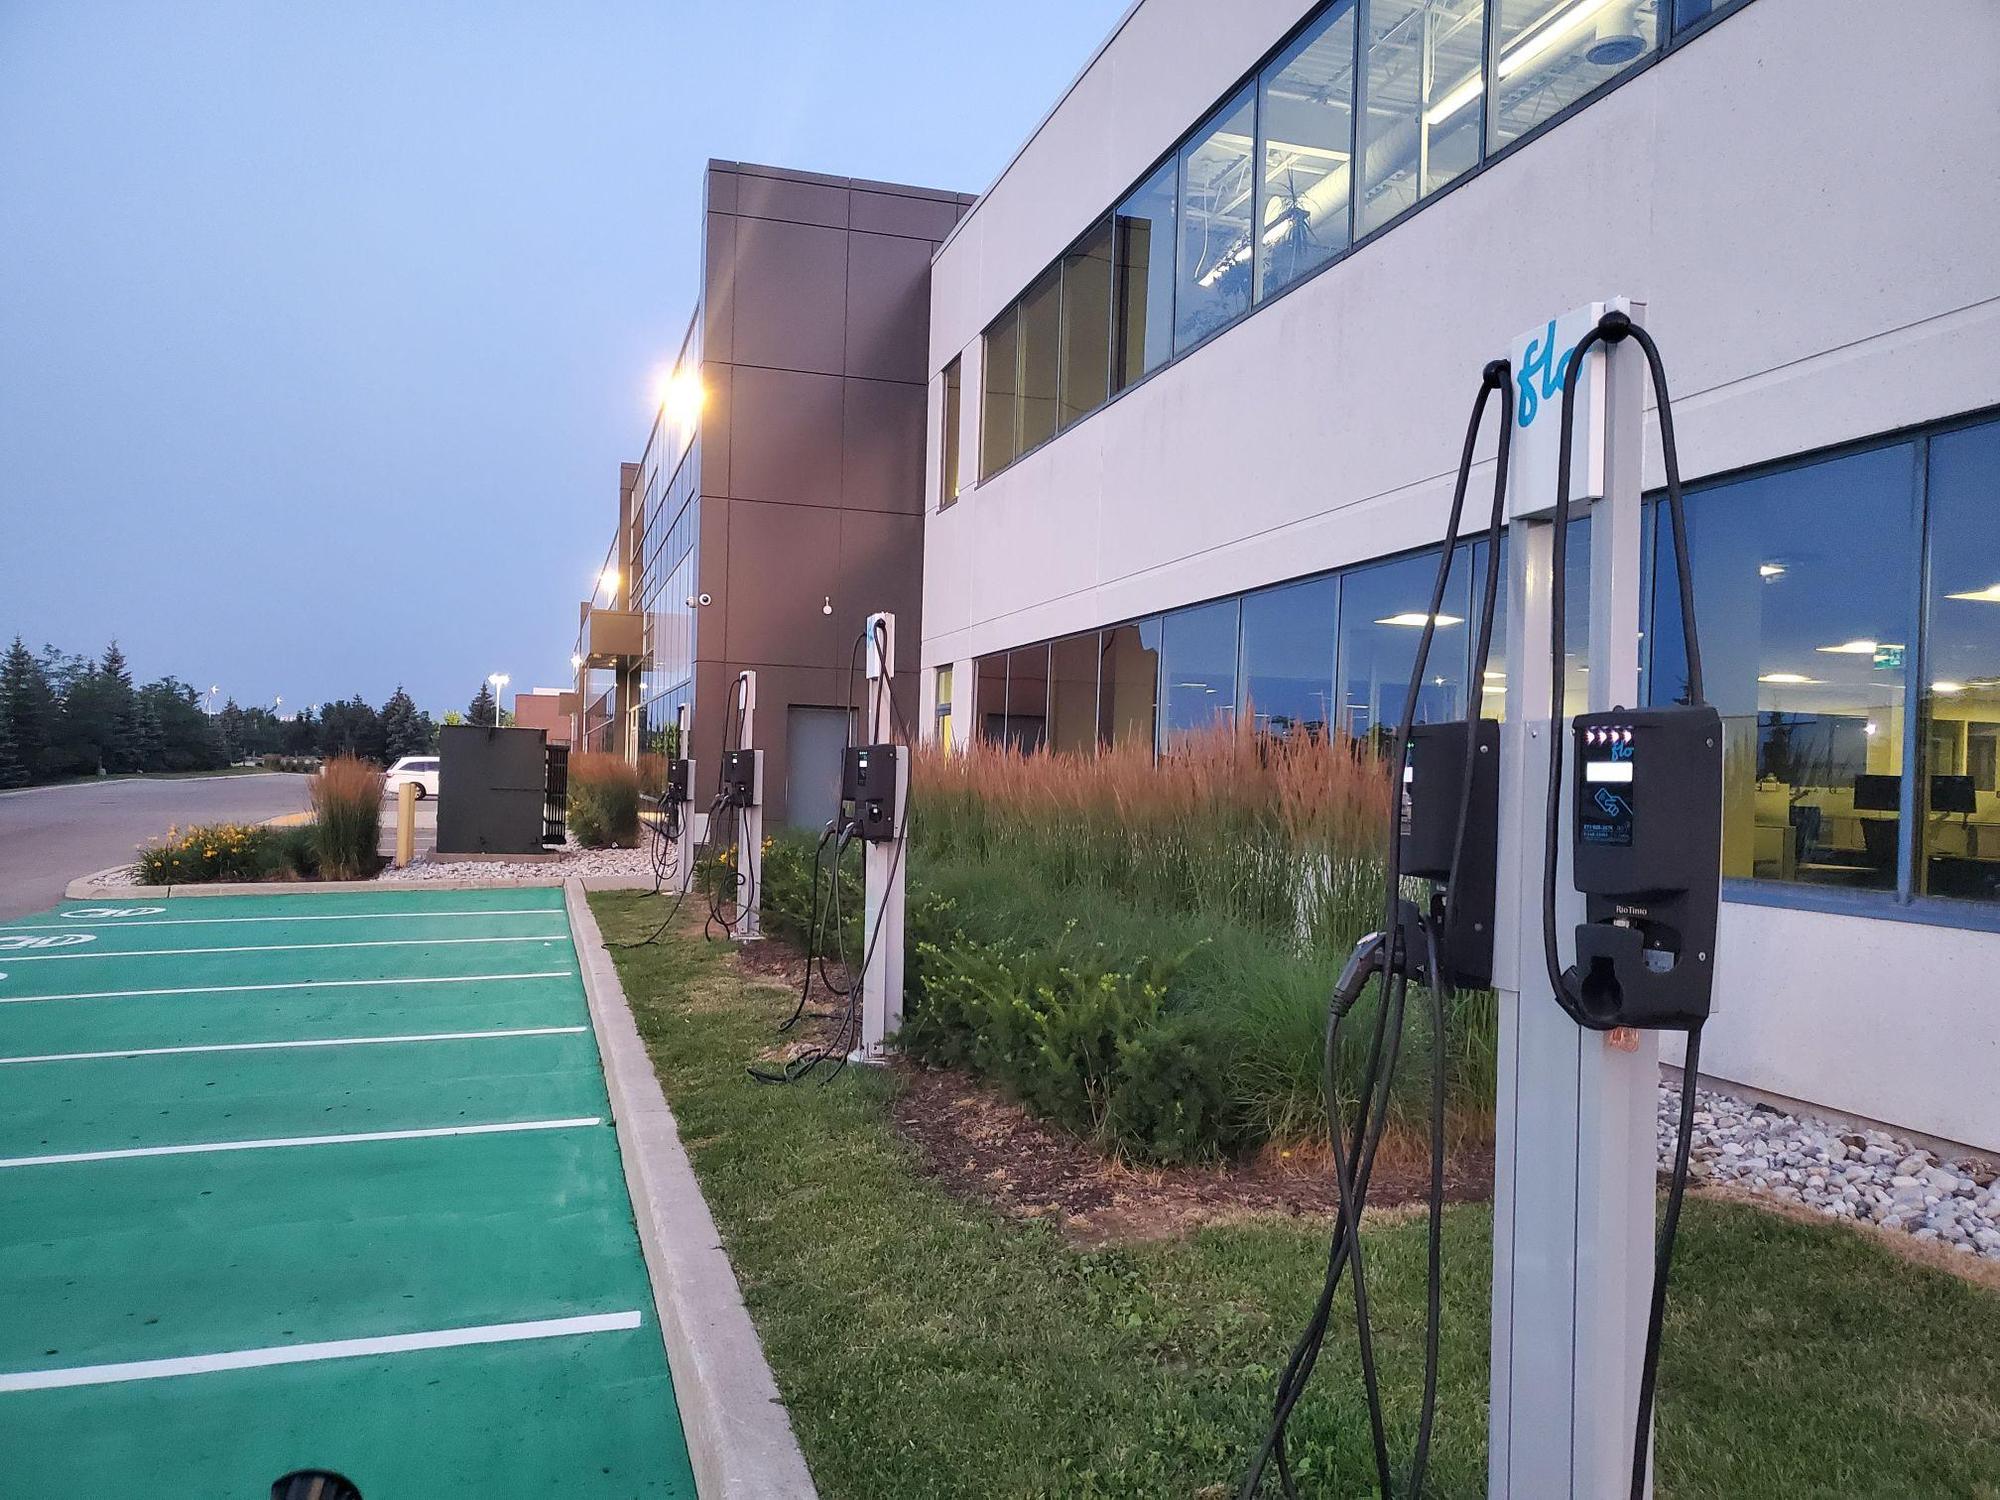 Electric vehicle charging stations an overview for commercial